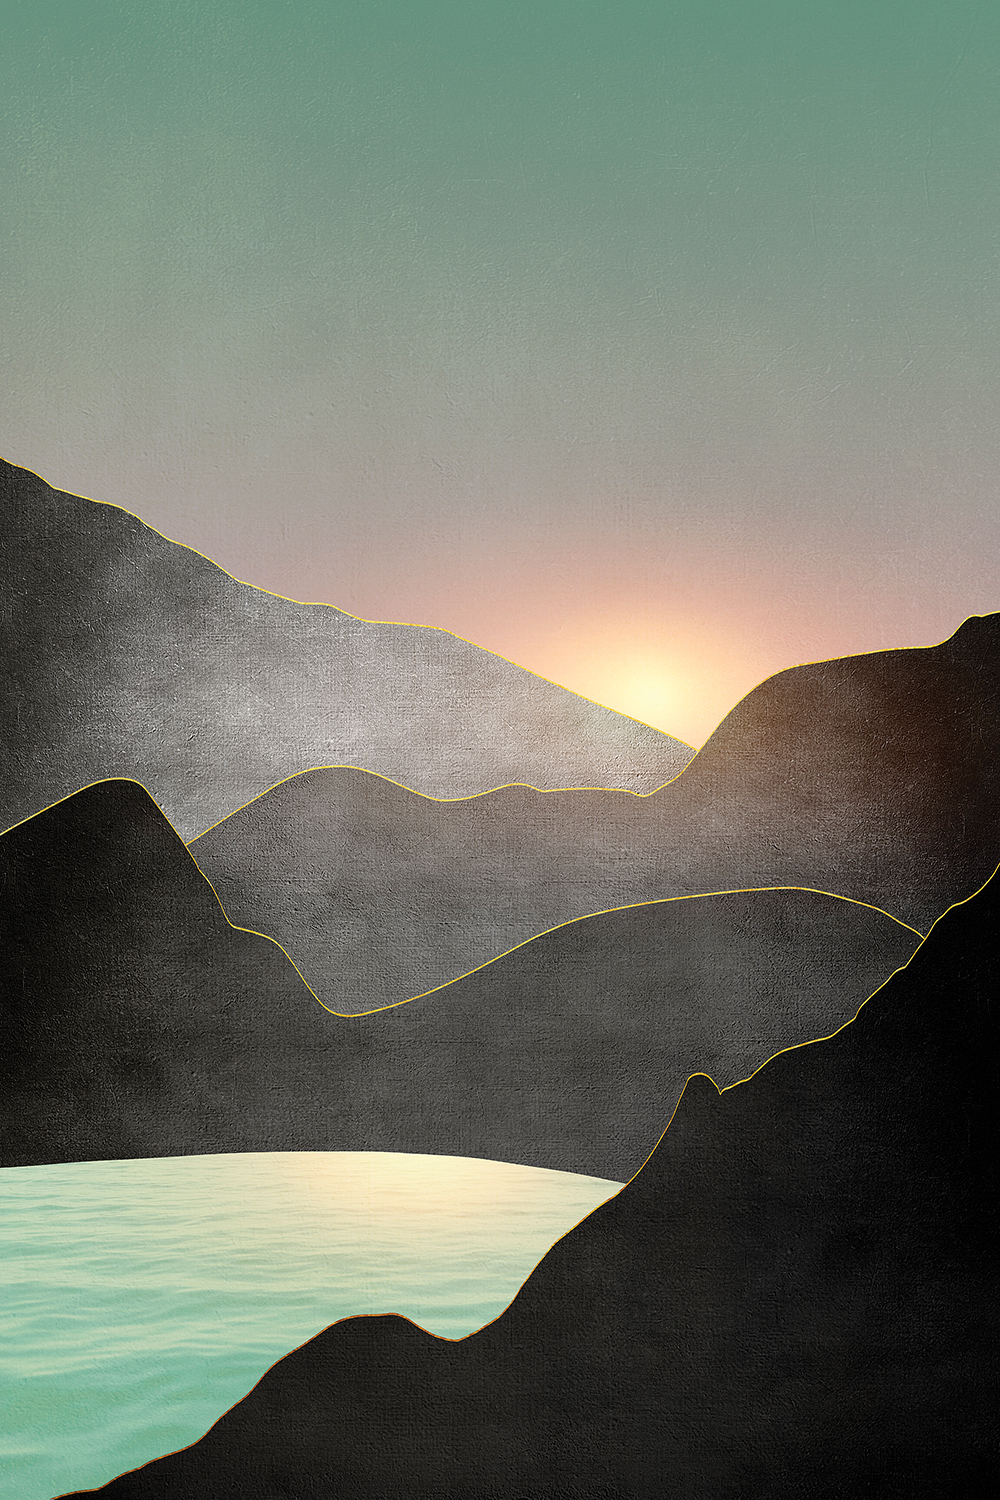 a sunset or sunrise over a few, minimalist mountains and a lake